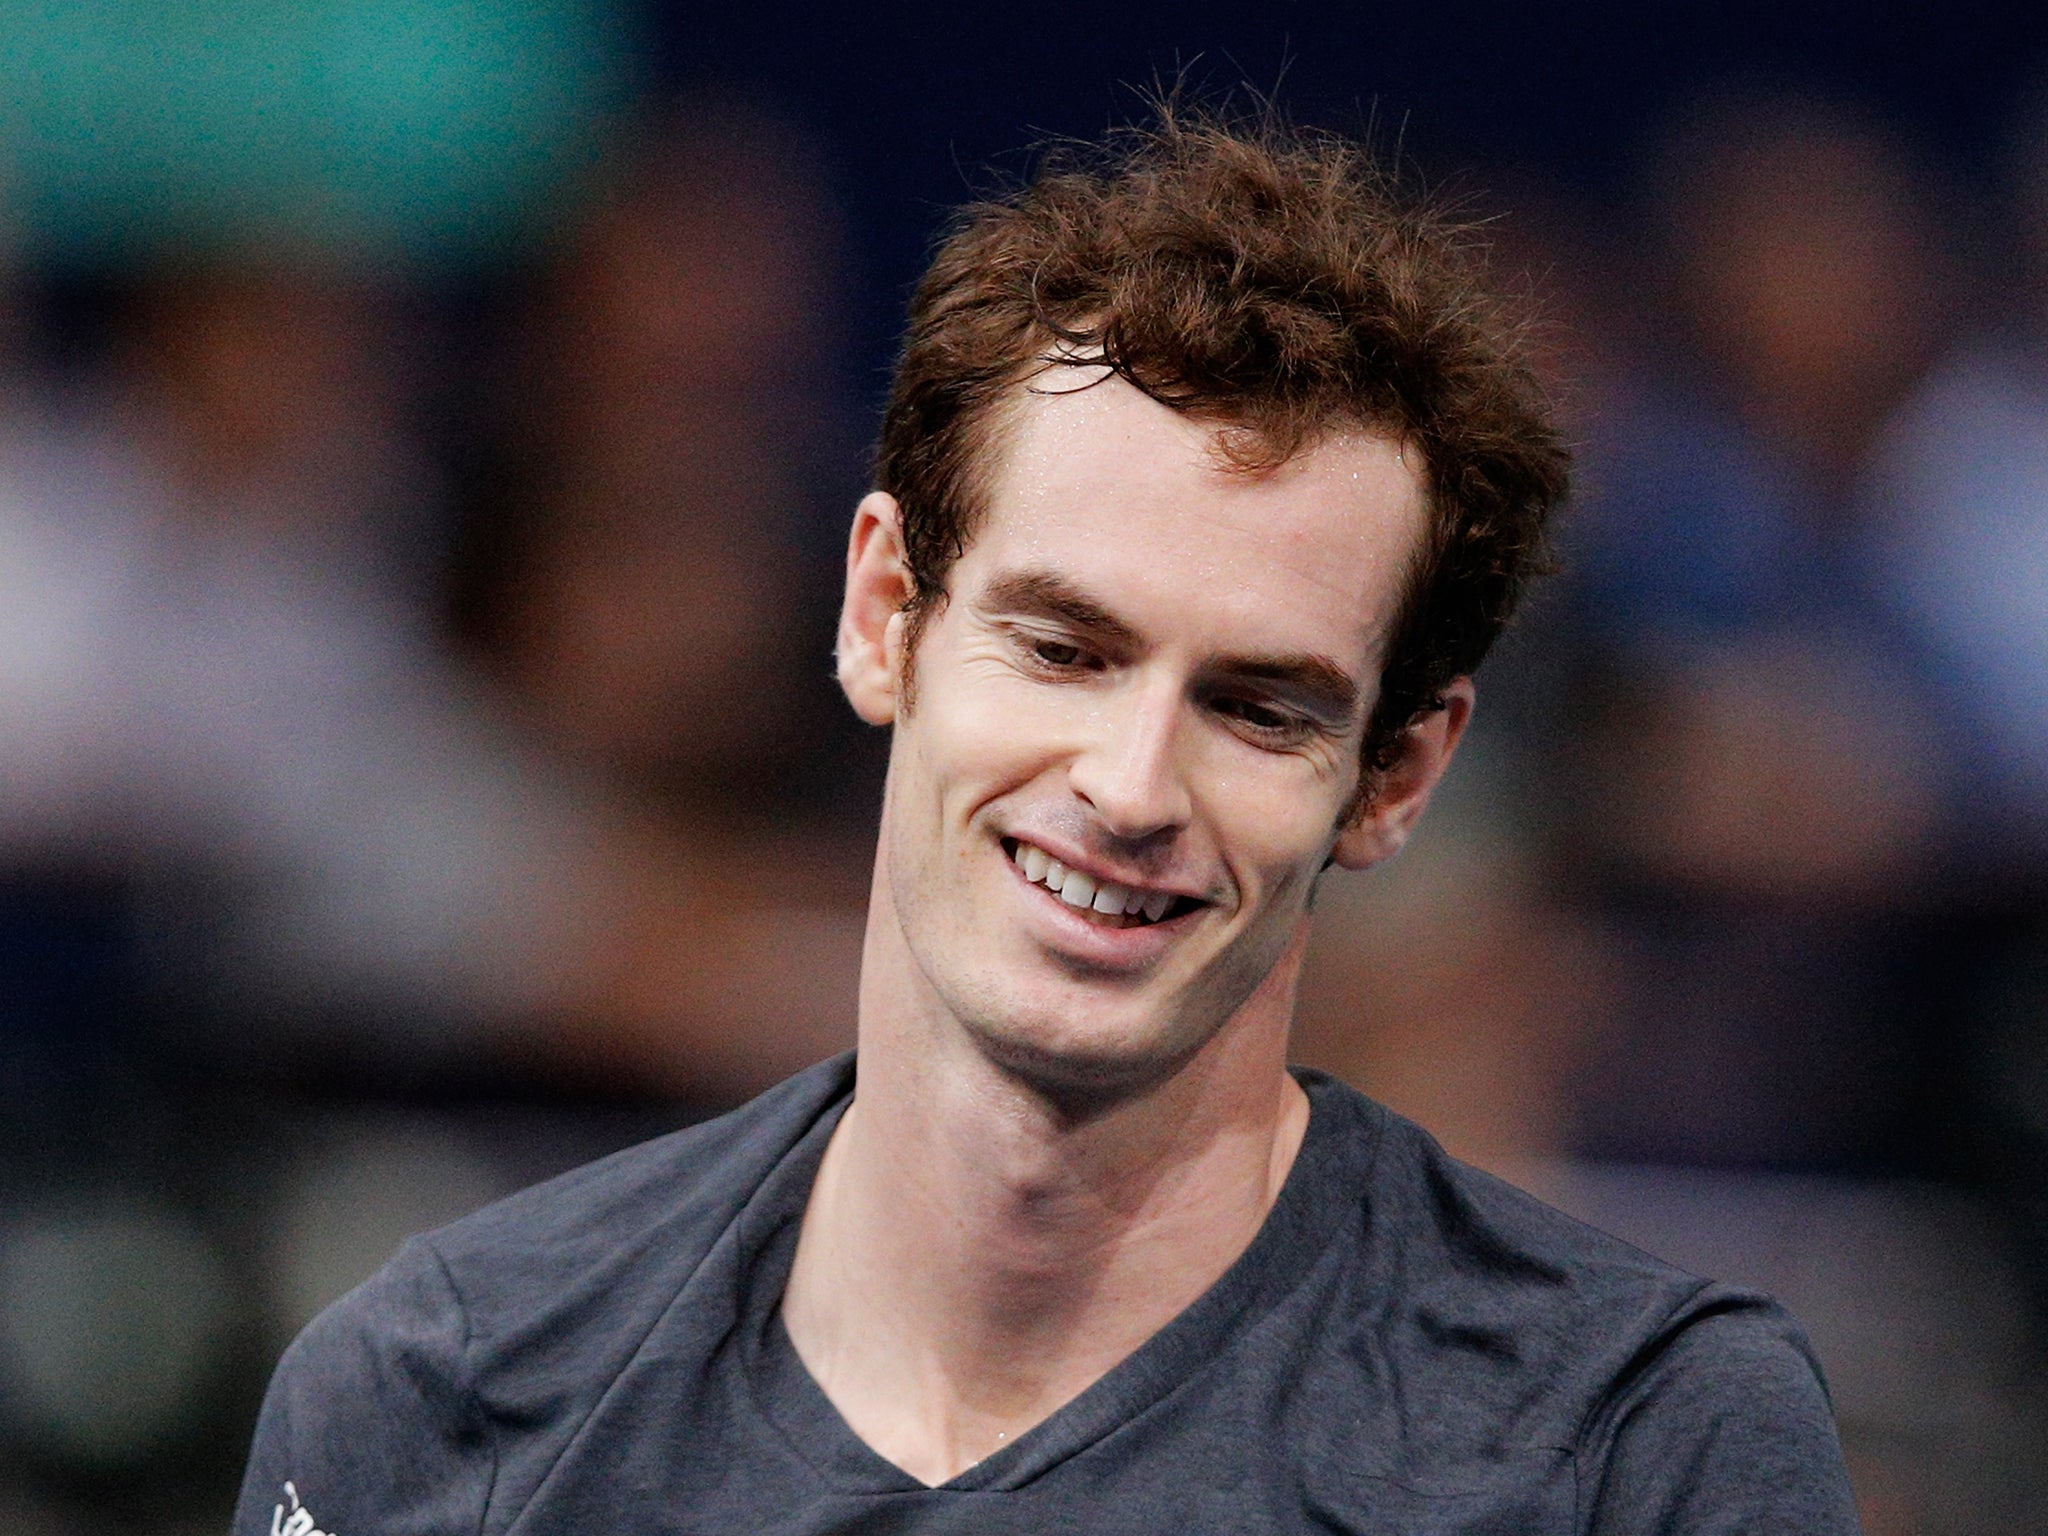 Andy Murray of Great Britain smiles in his quarterfinal match against Novak Djokovic